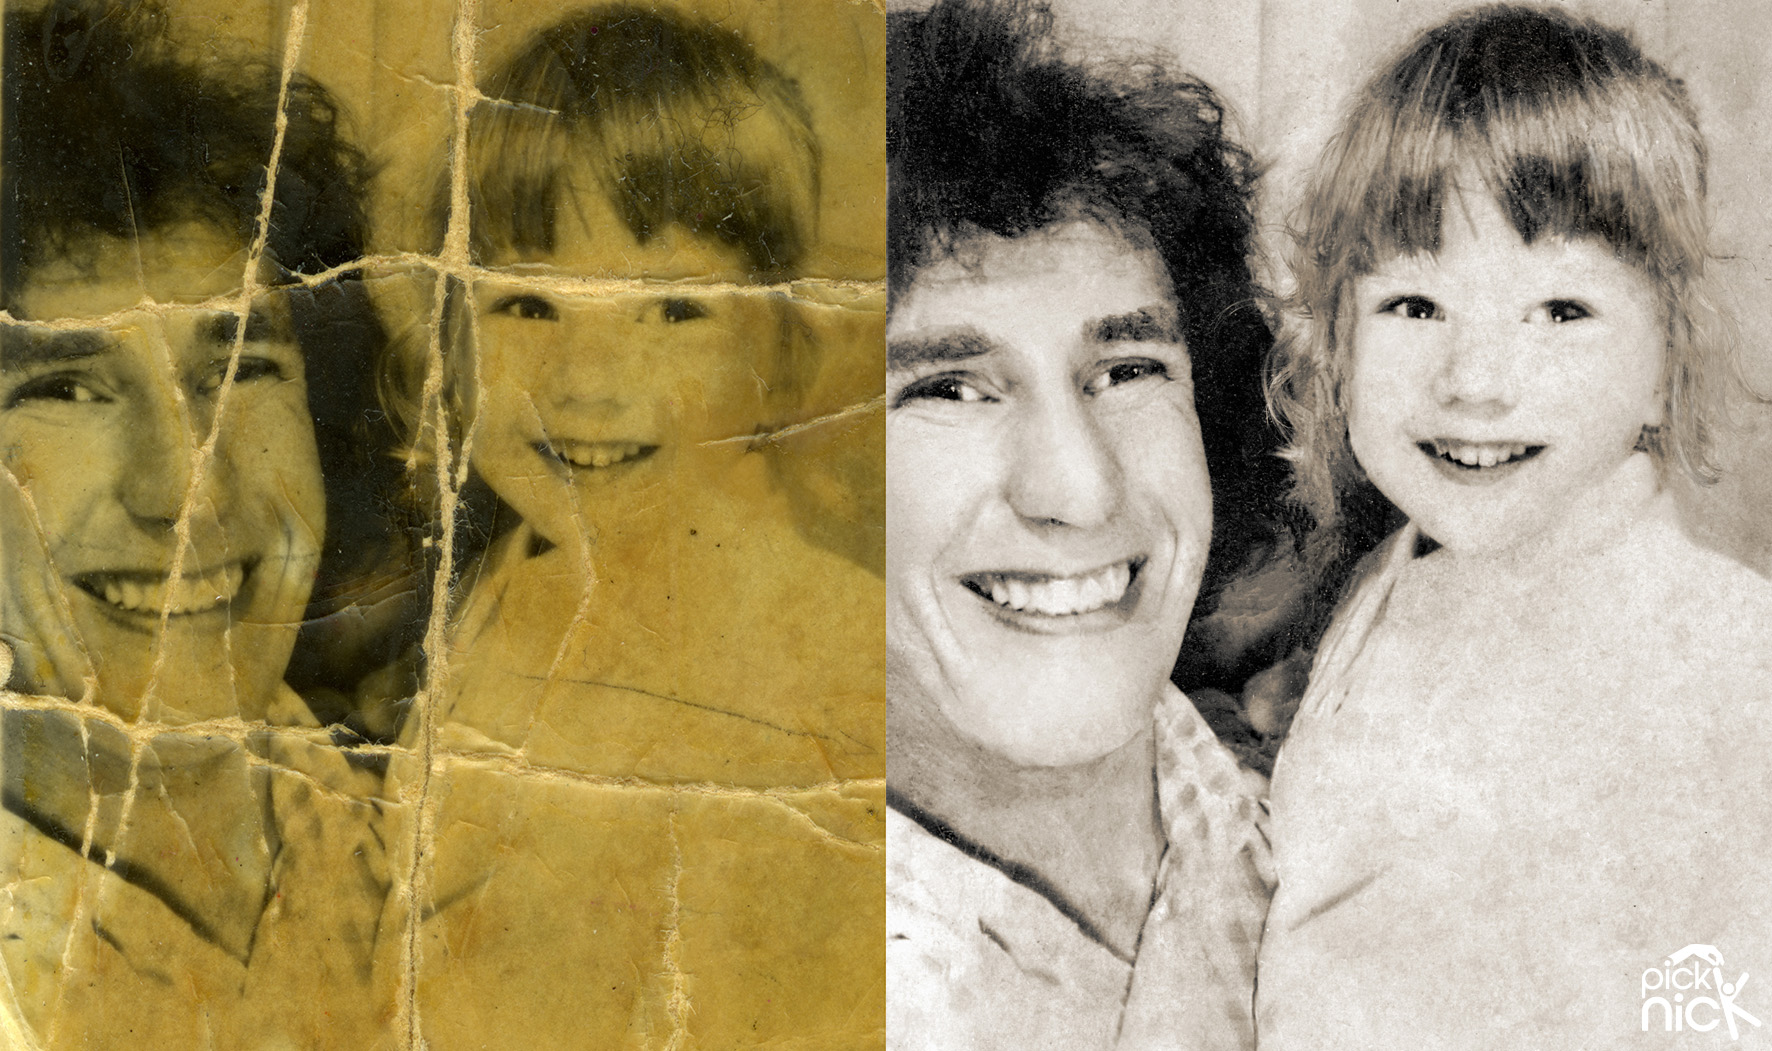 Tiny original photo of Father and Daughter. Restored and enlarged